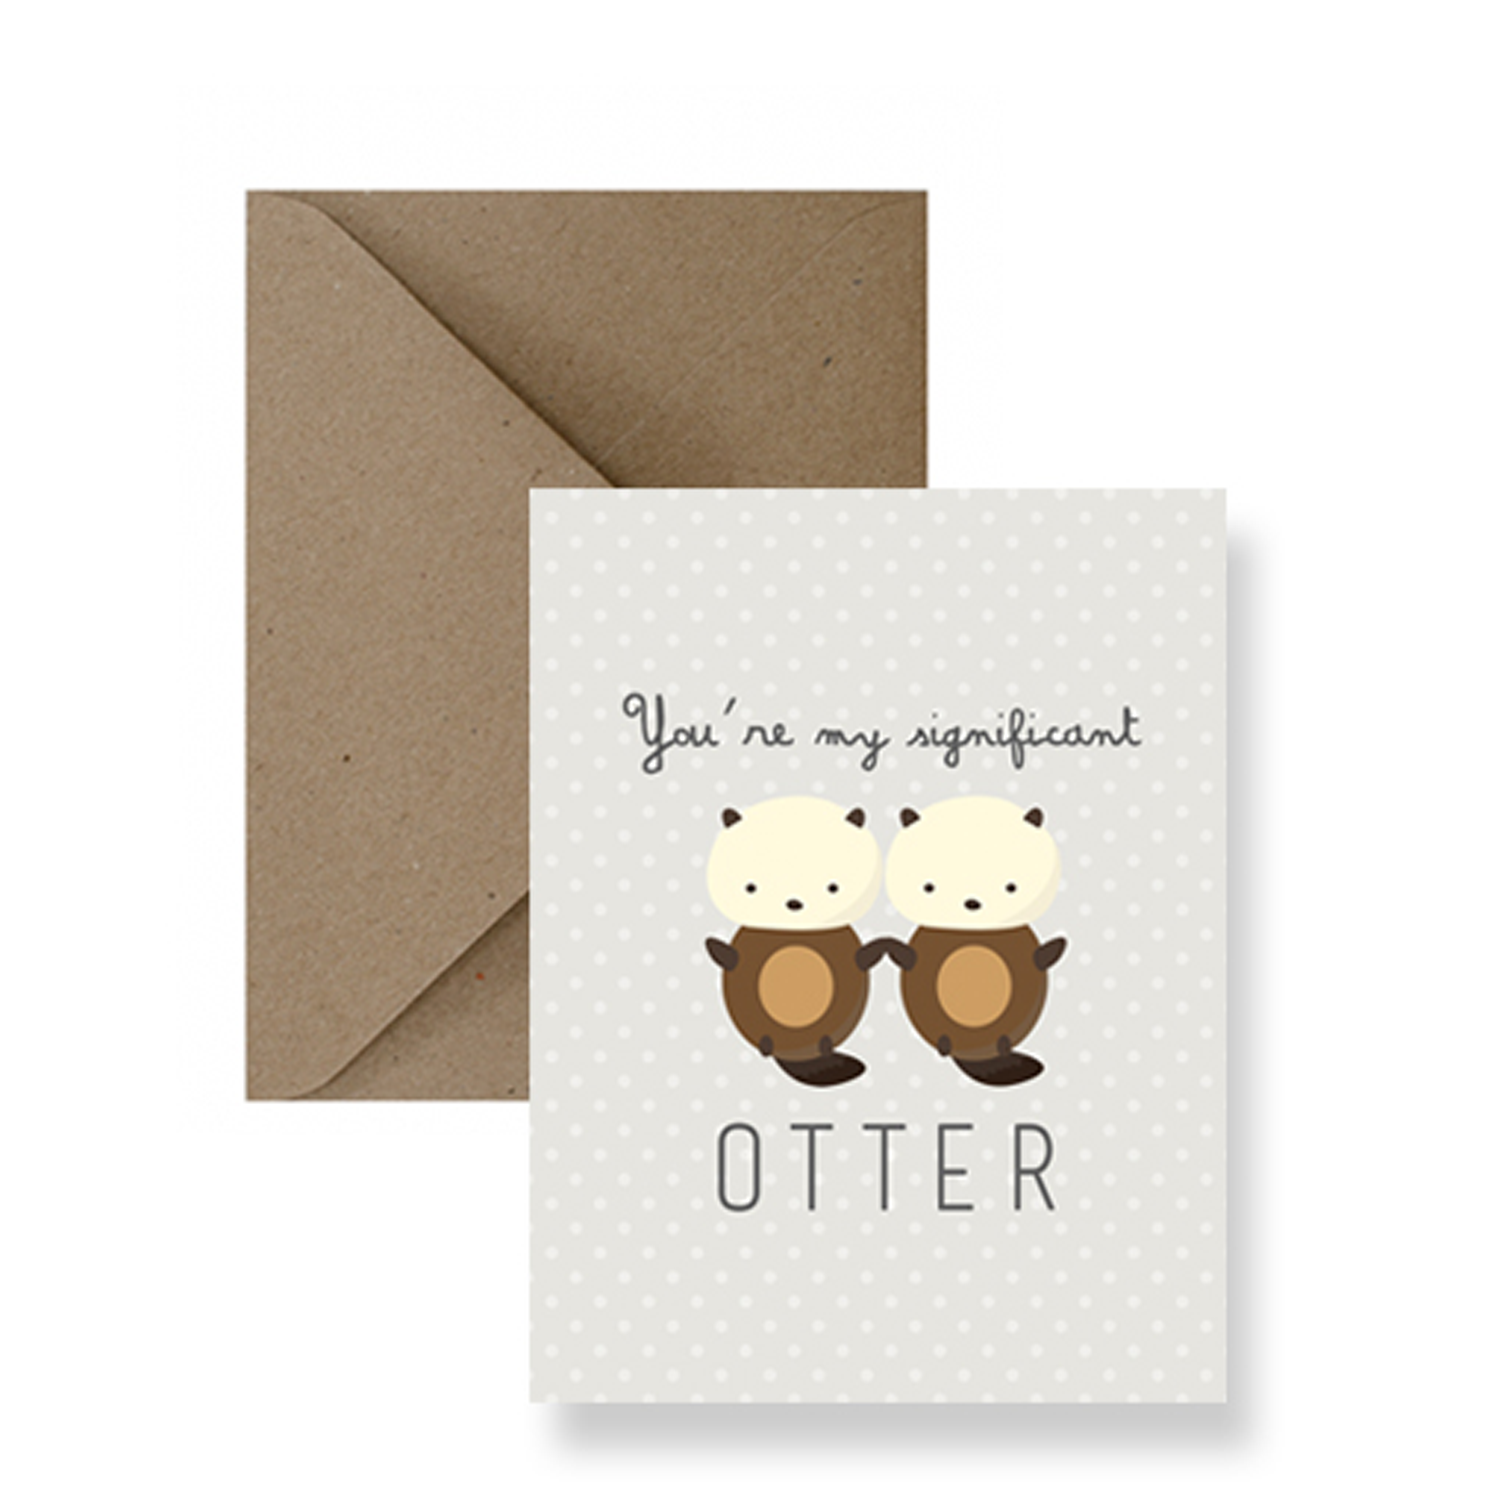 IMPAPER: Significant Otter Card Product Image 1 of 4